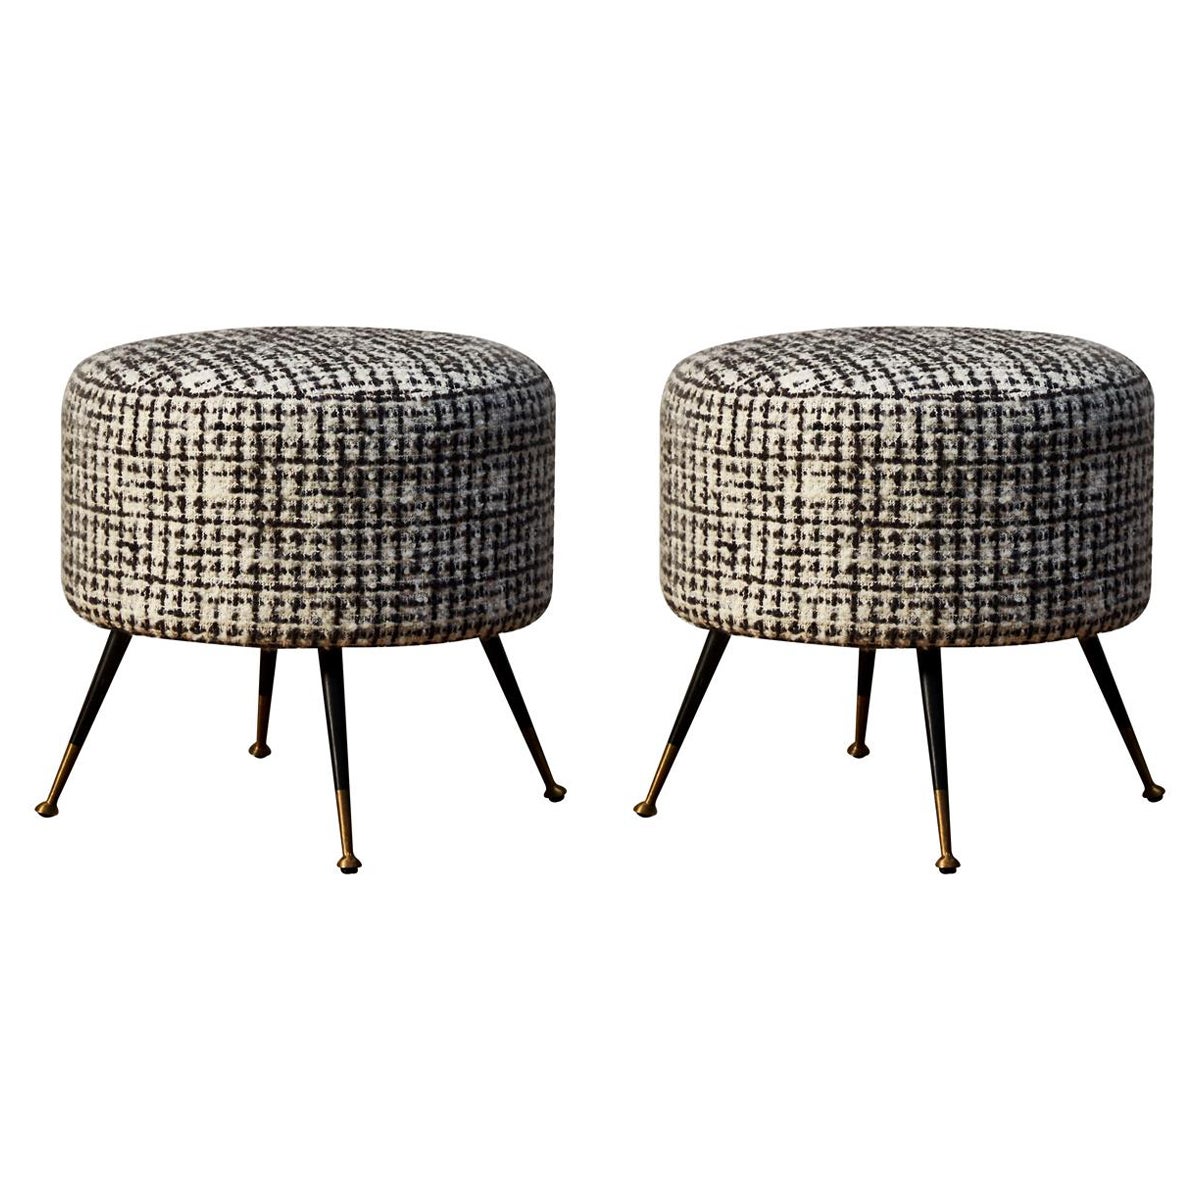 Pair of Stools by Studio Glustin For Sale